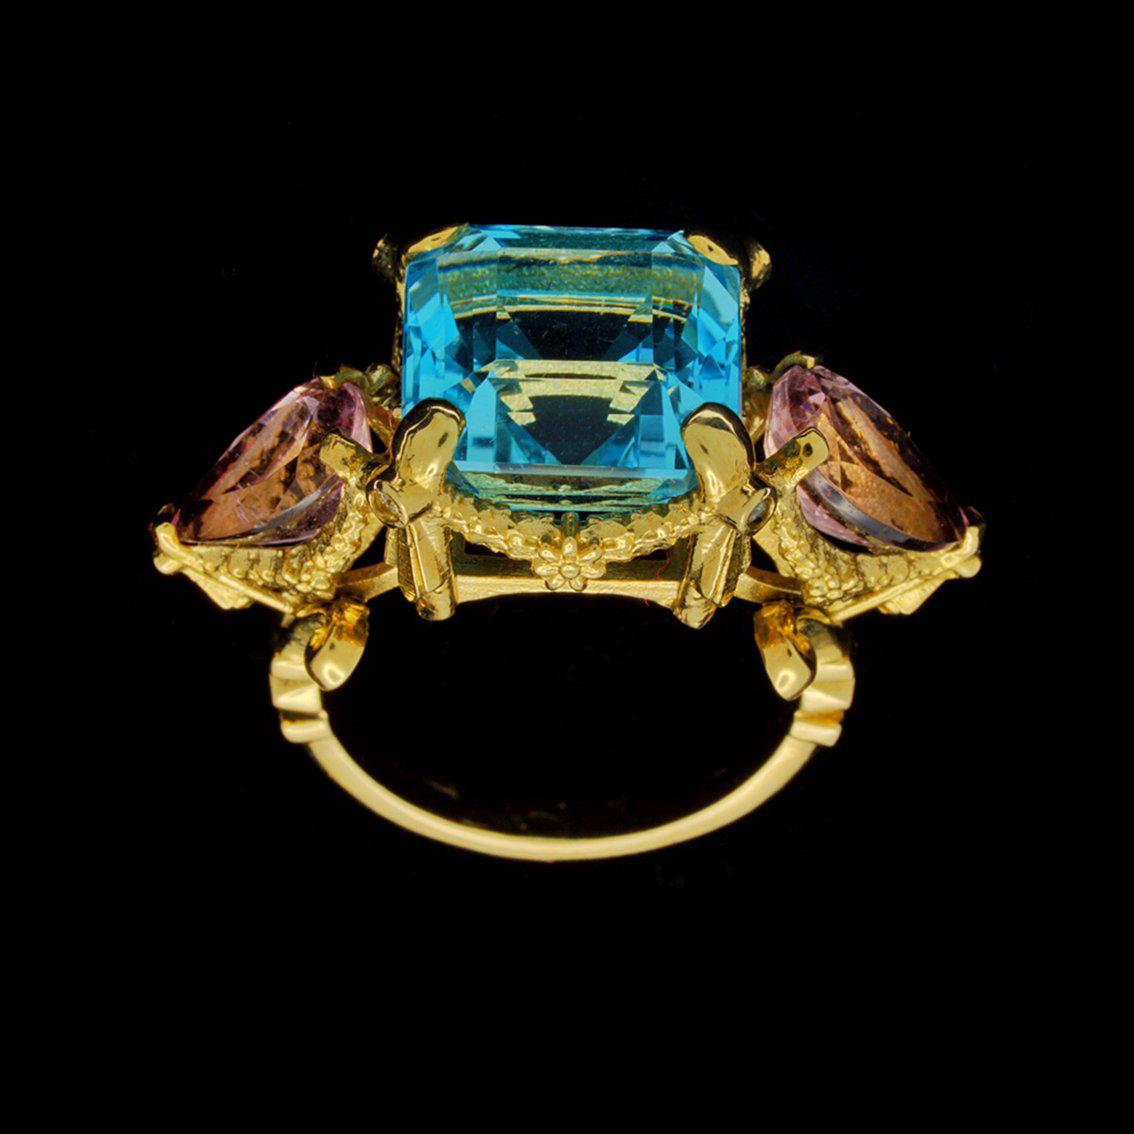 FLORESCENCE GARLAND RING

Intricately handcrafted in 9kt yellow gold this exquisite renaissance inspired ring features a breathtaking sky blue square cut topaz aloft a signature William Llewellyn Griffiths split shank and garland setting decorated